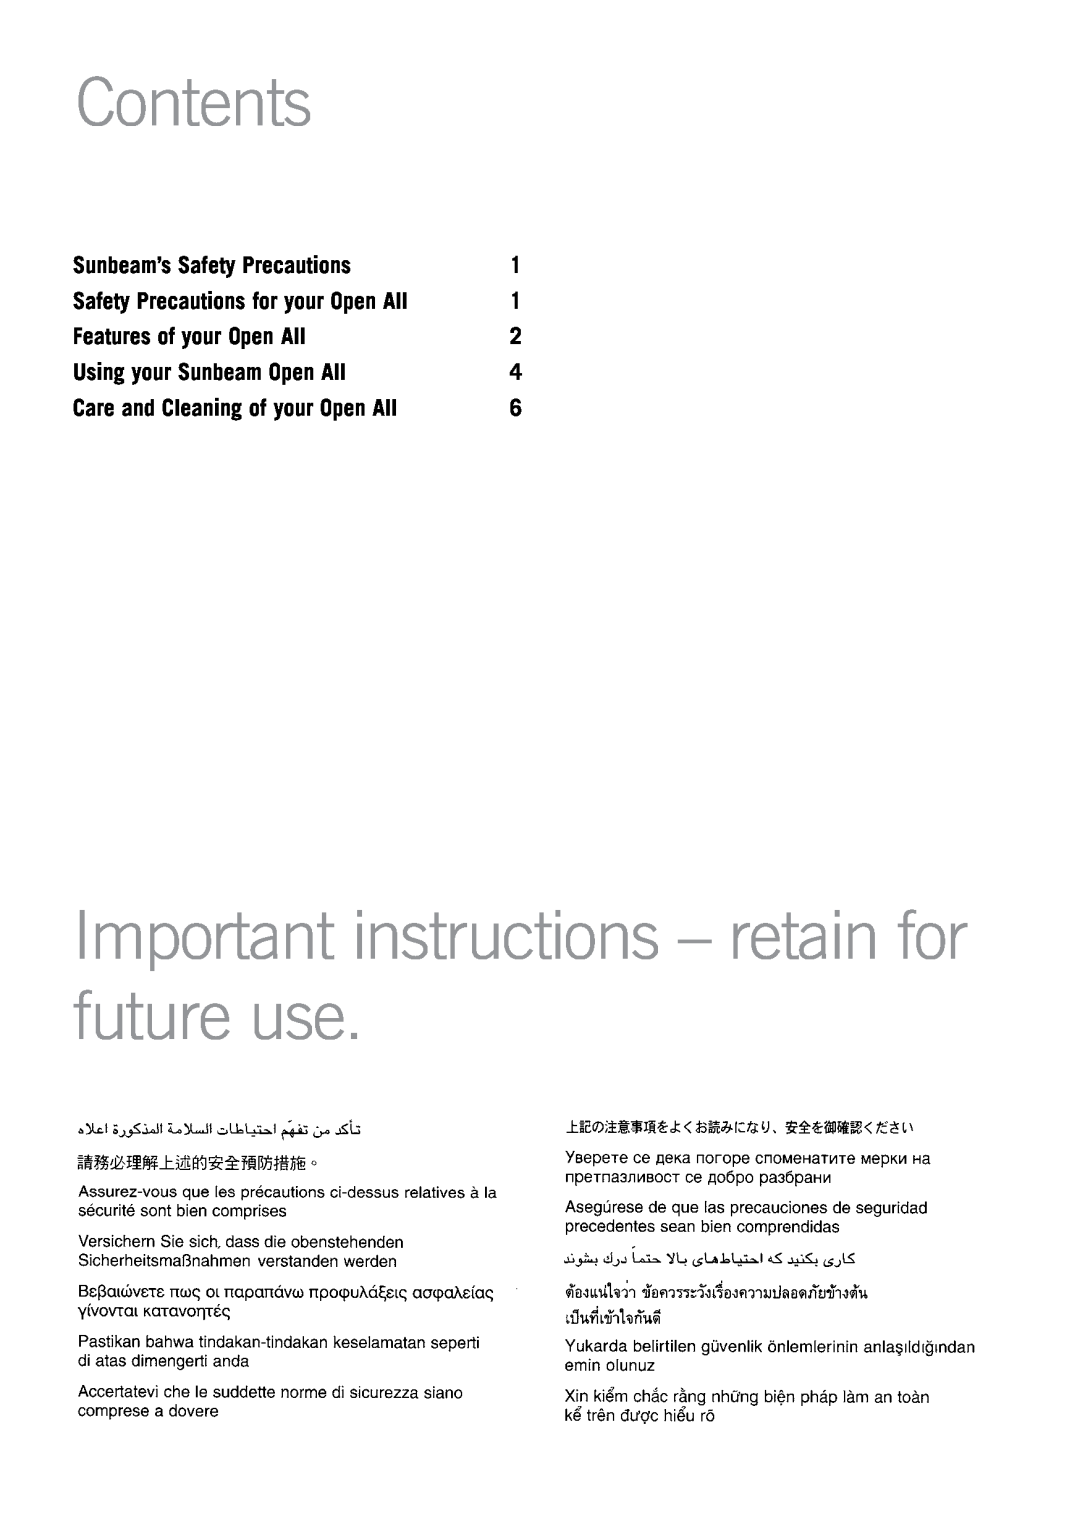 Sunbeam CA2800 manual Contents, Important instructions - retain for future use, Sunbeam’s Safety Precautions 